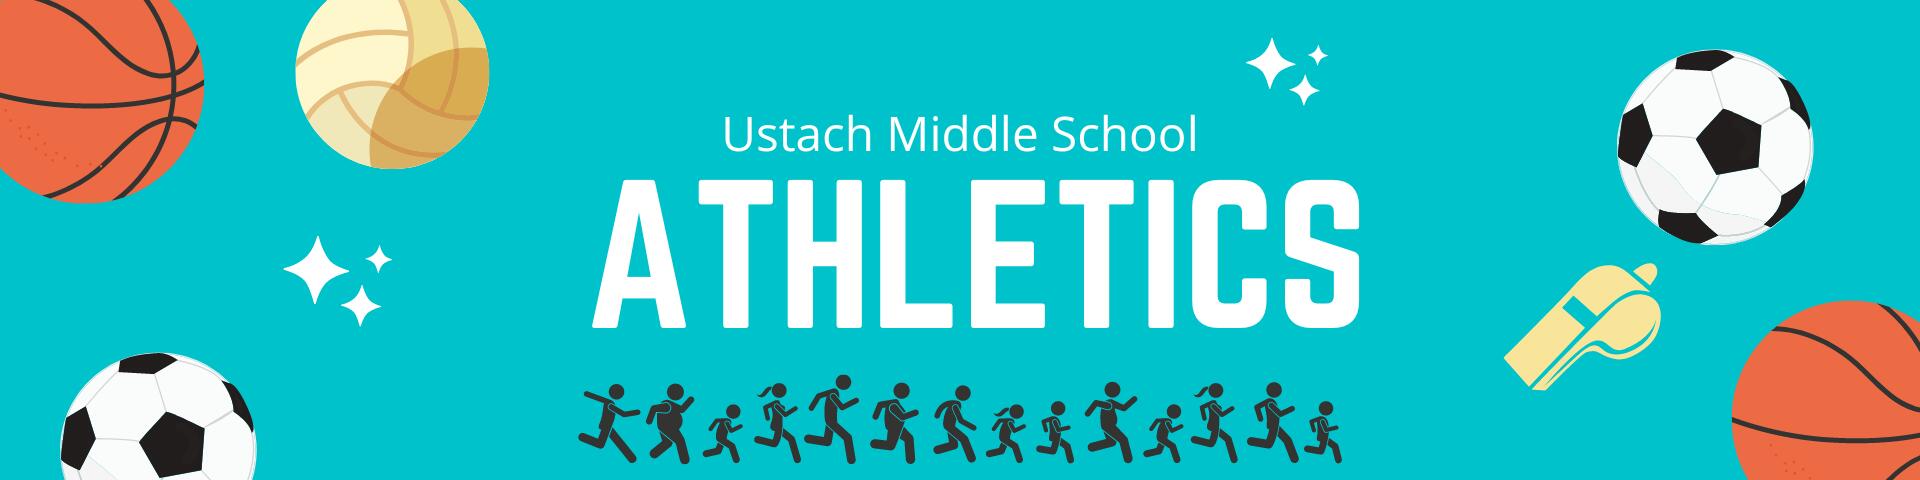 athletics at ustach middle school